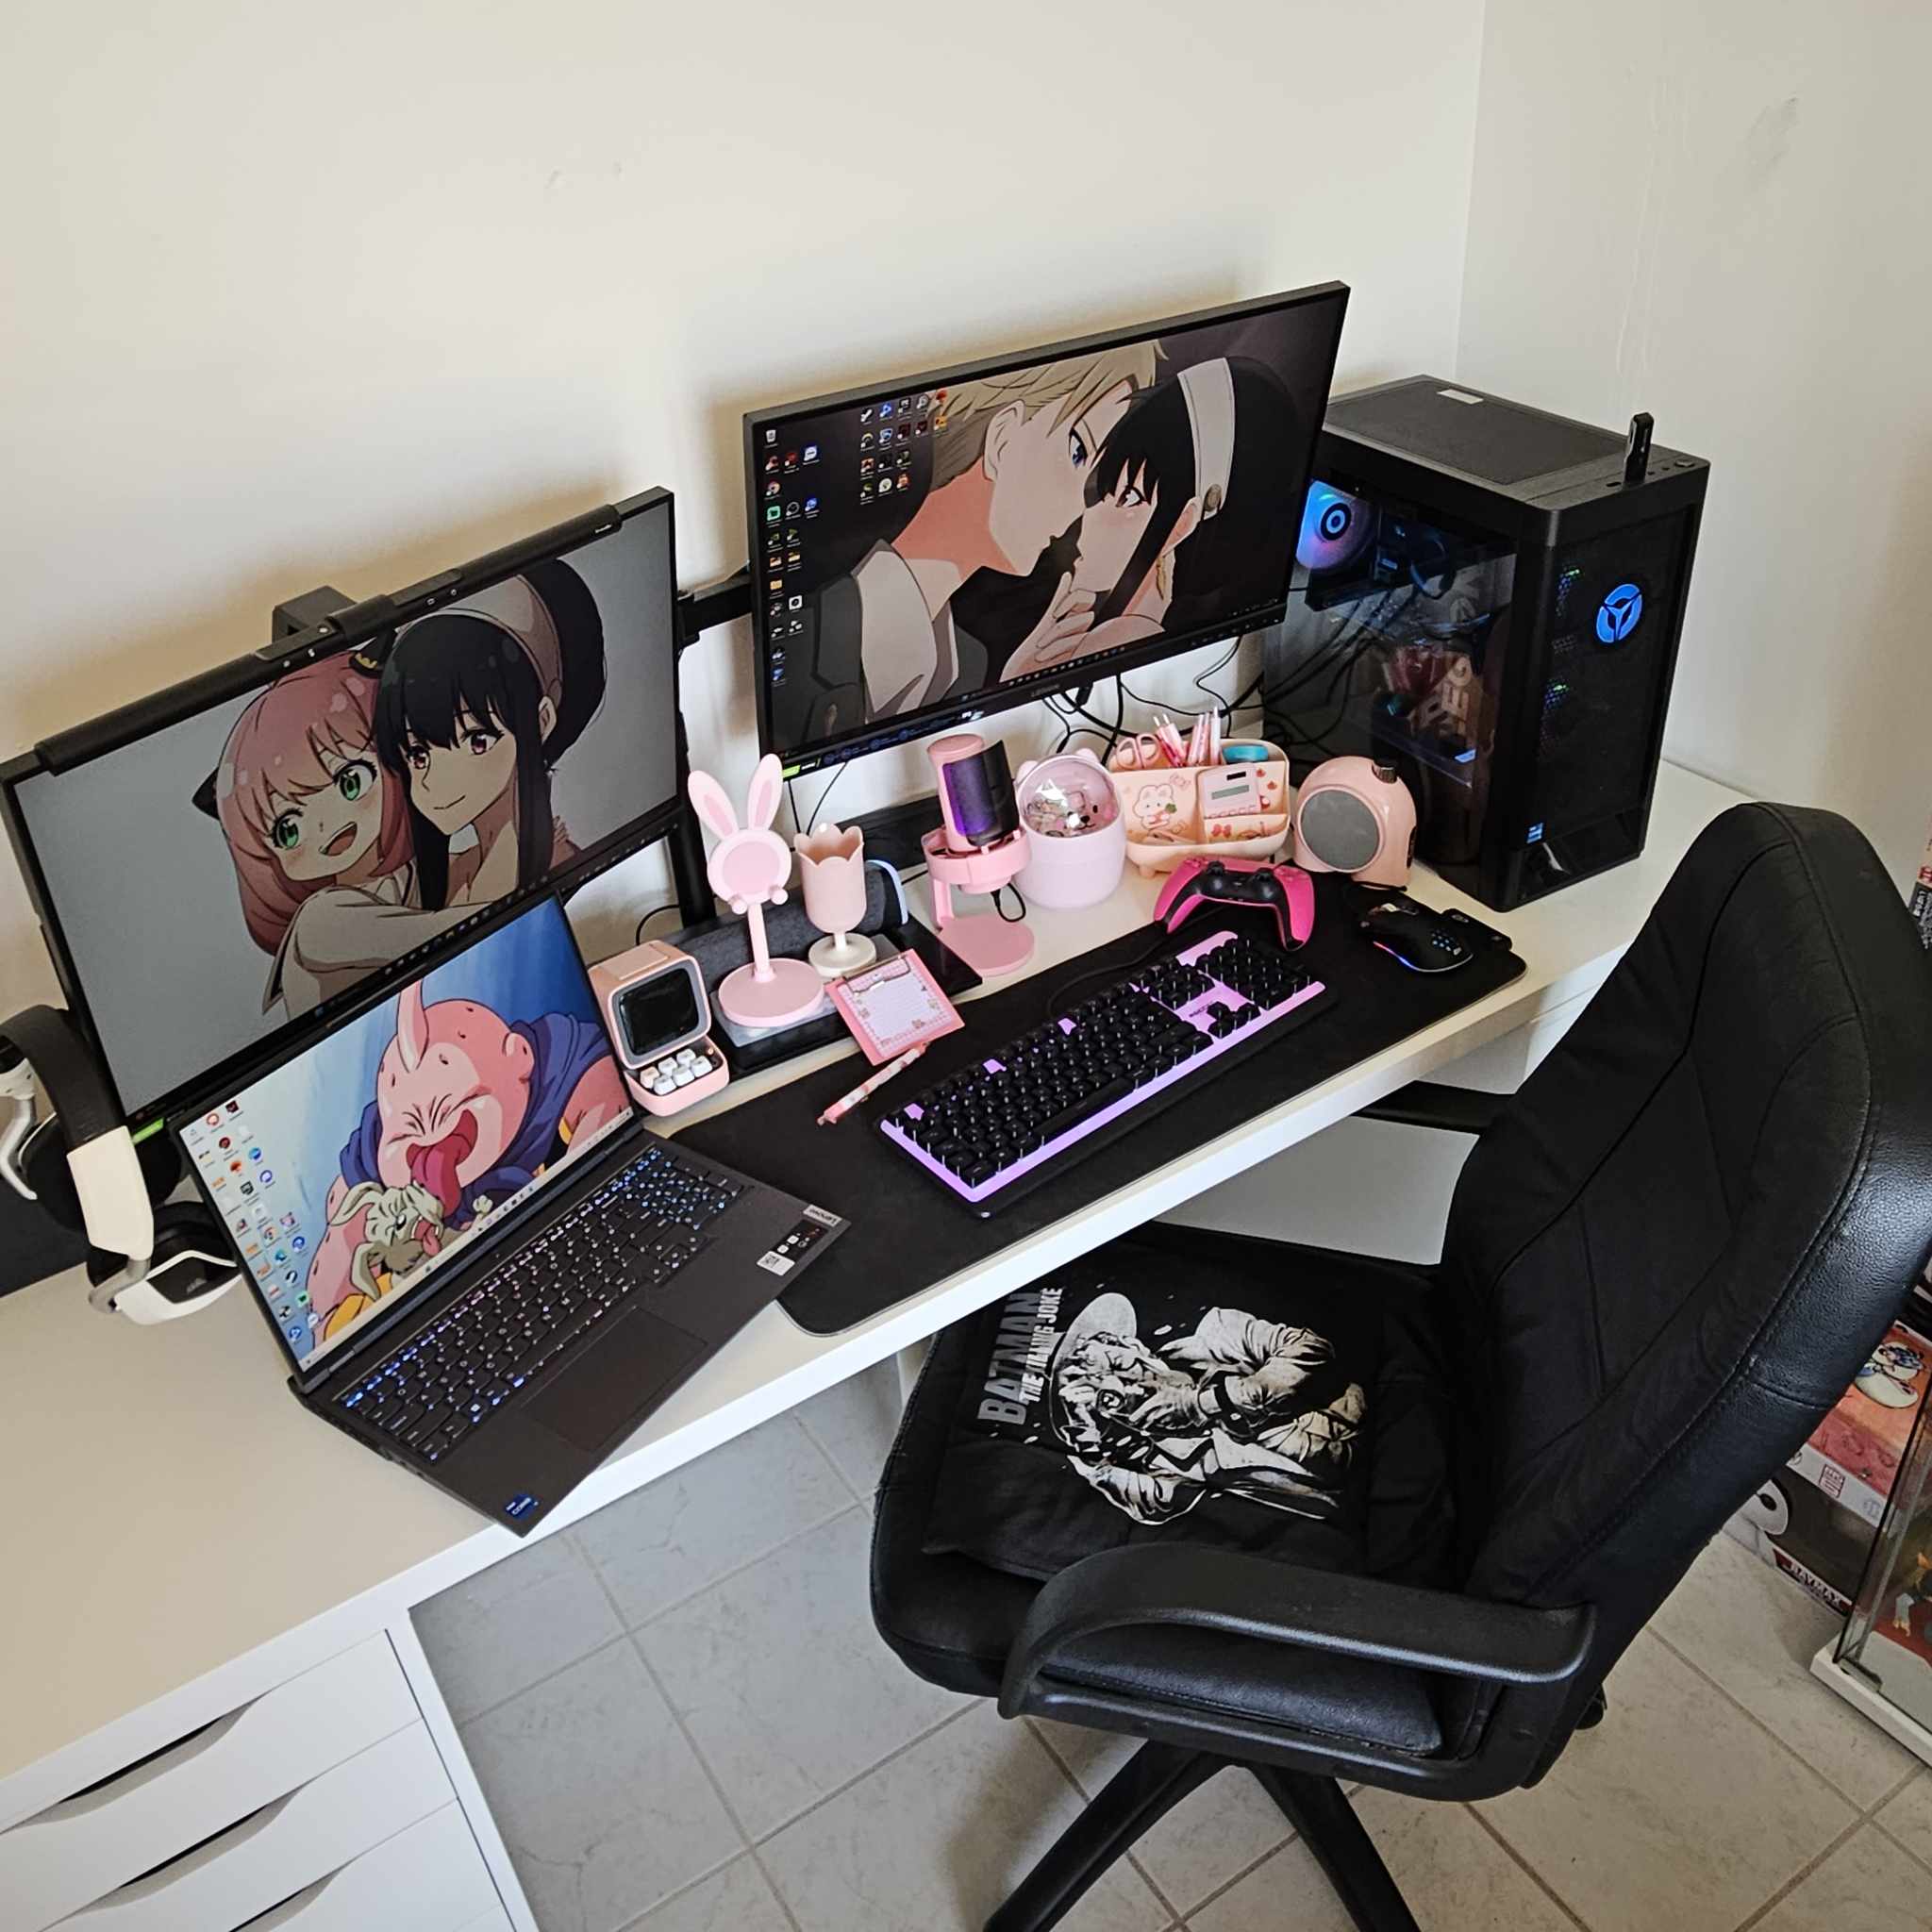 noblechairs - What a dream to sit at _hardtrips_ (Instagram) setup - gaming  and watching Anime at the same time. Any new series you're loving at the  moment? Enhance your setup ➡️